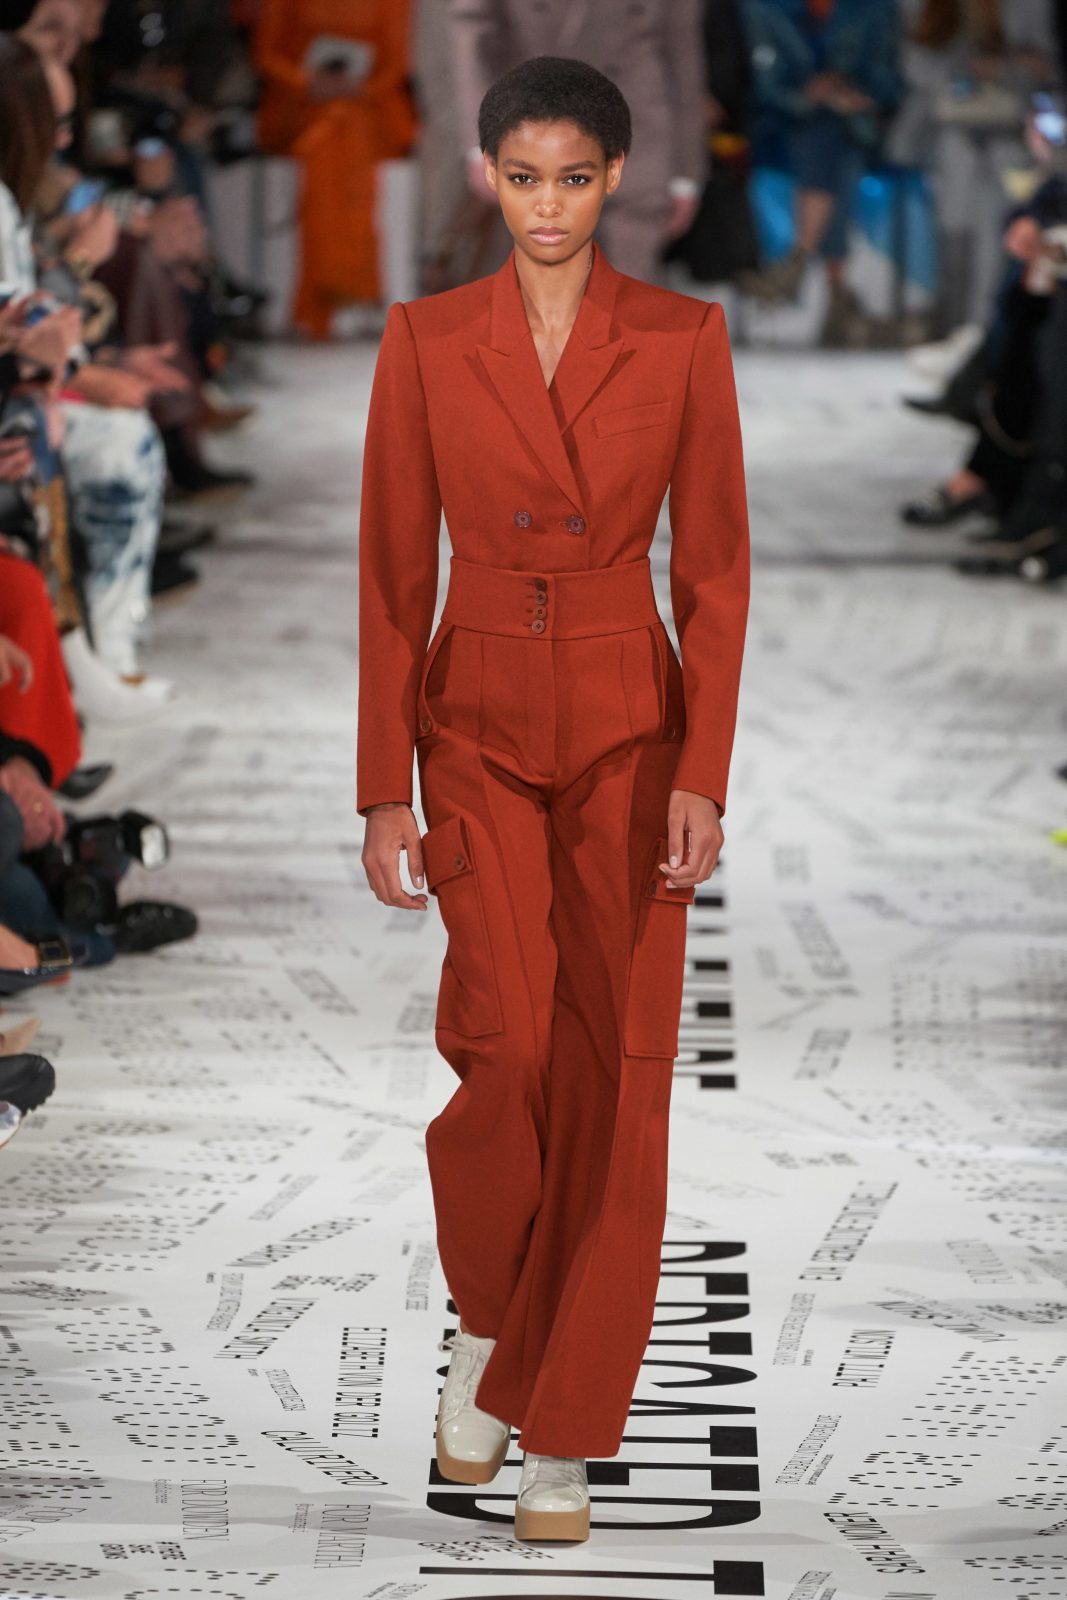 Tailored Suits From The Catwalk